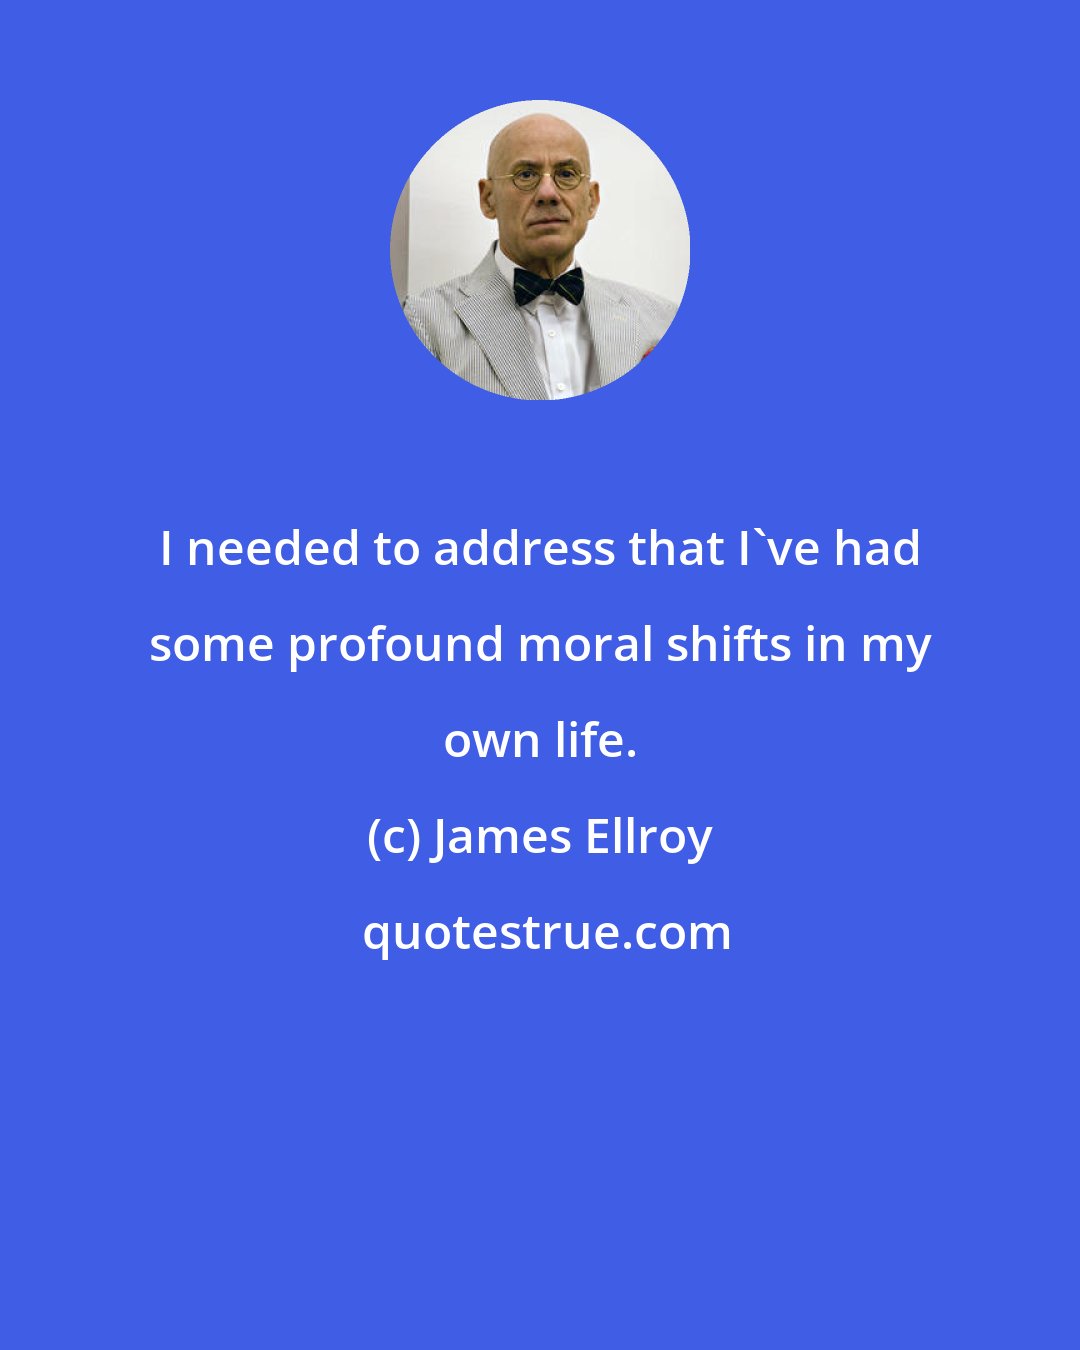 James Ellroy: I needed to address that I've had some profound moral shifts in my own life.